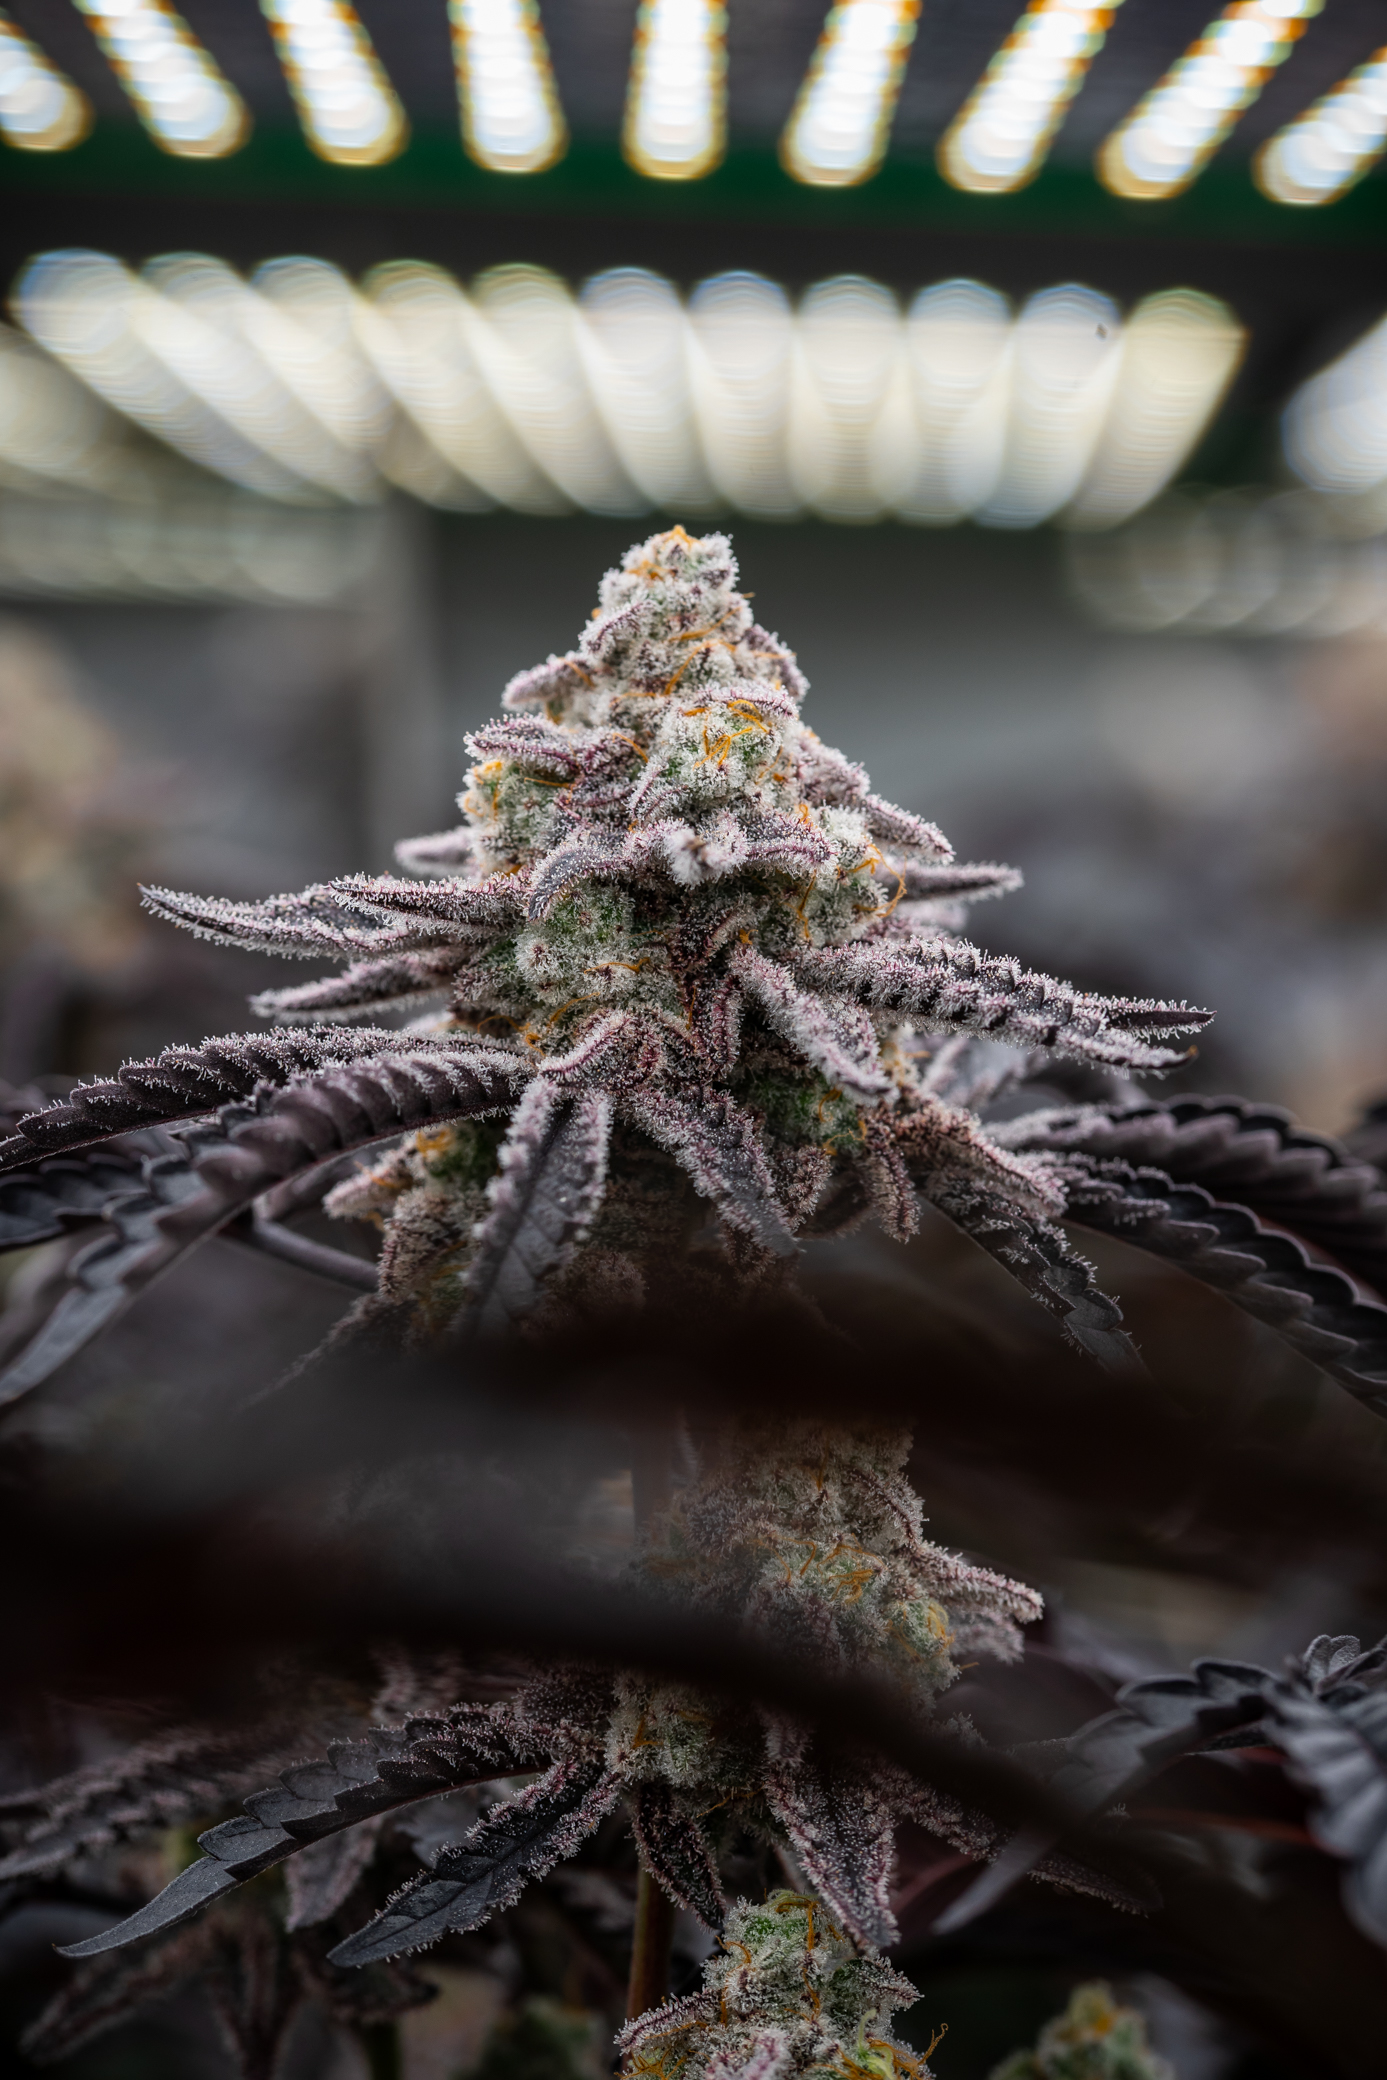 RII Provides Energy Efficiency Workshops for Michigan Indoor Cannabis Cultivators